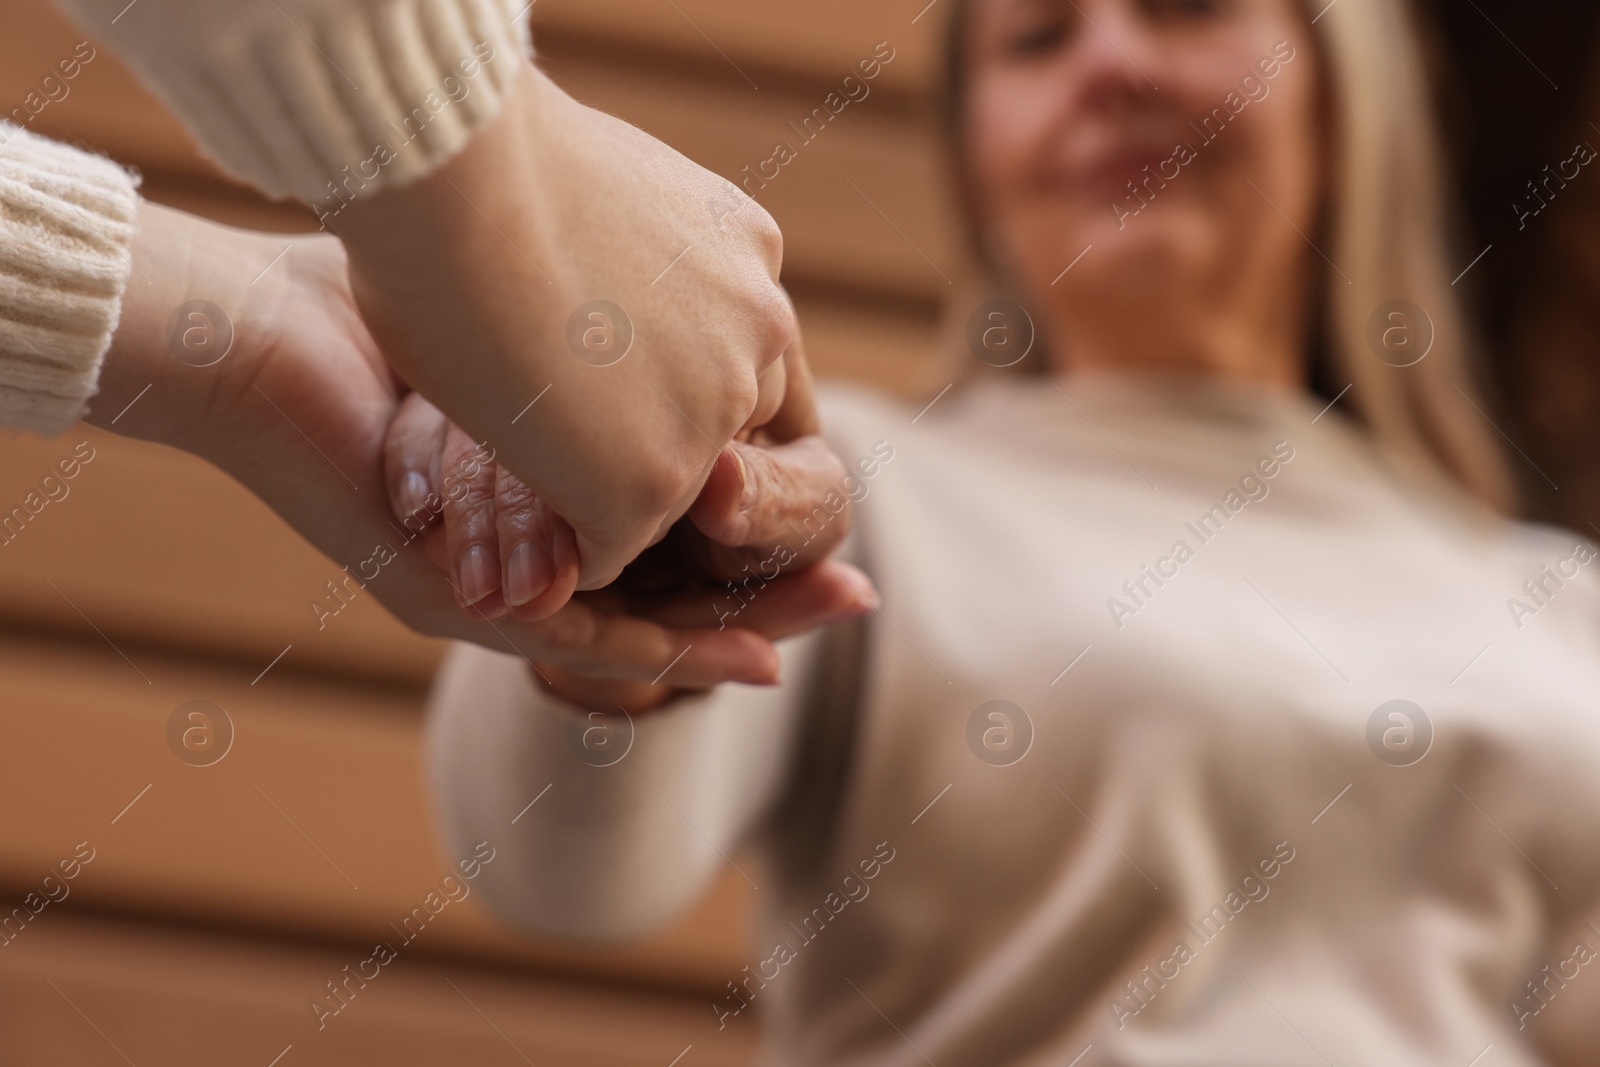 Photo of Trust and support. Women joining hands outdoors, low angle view